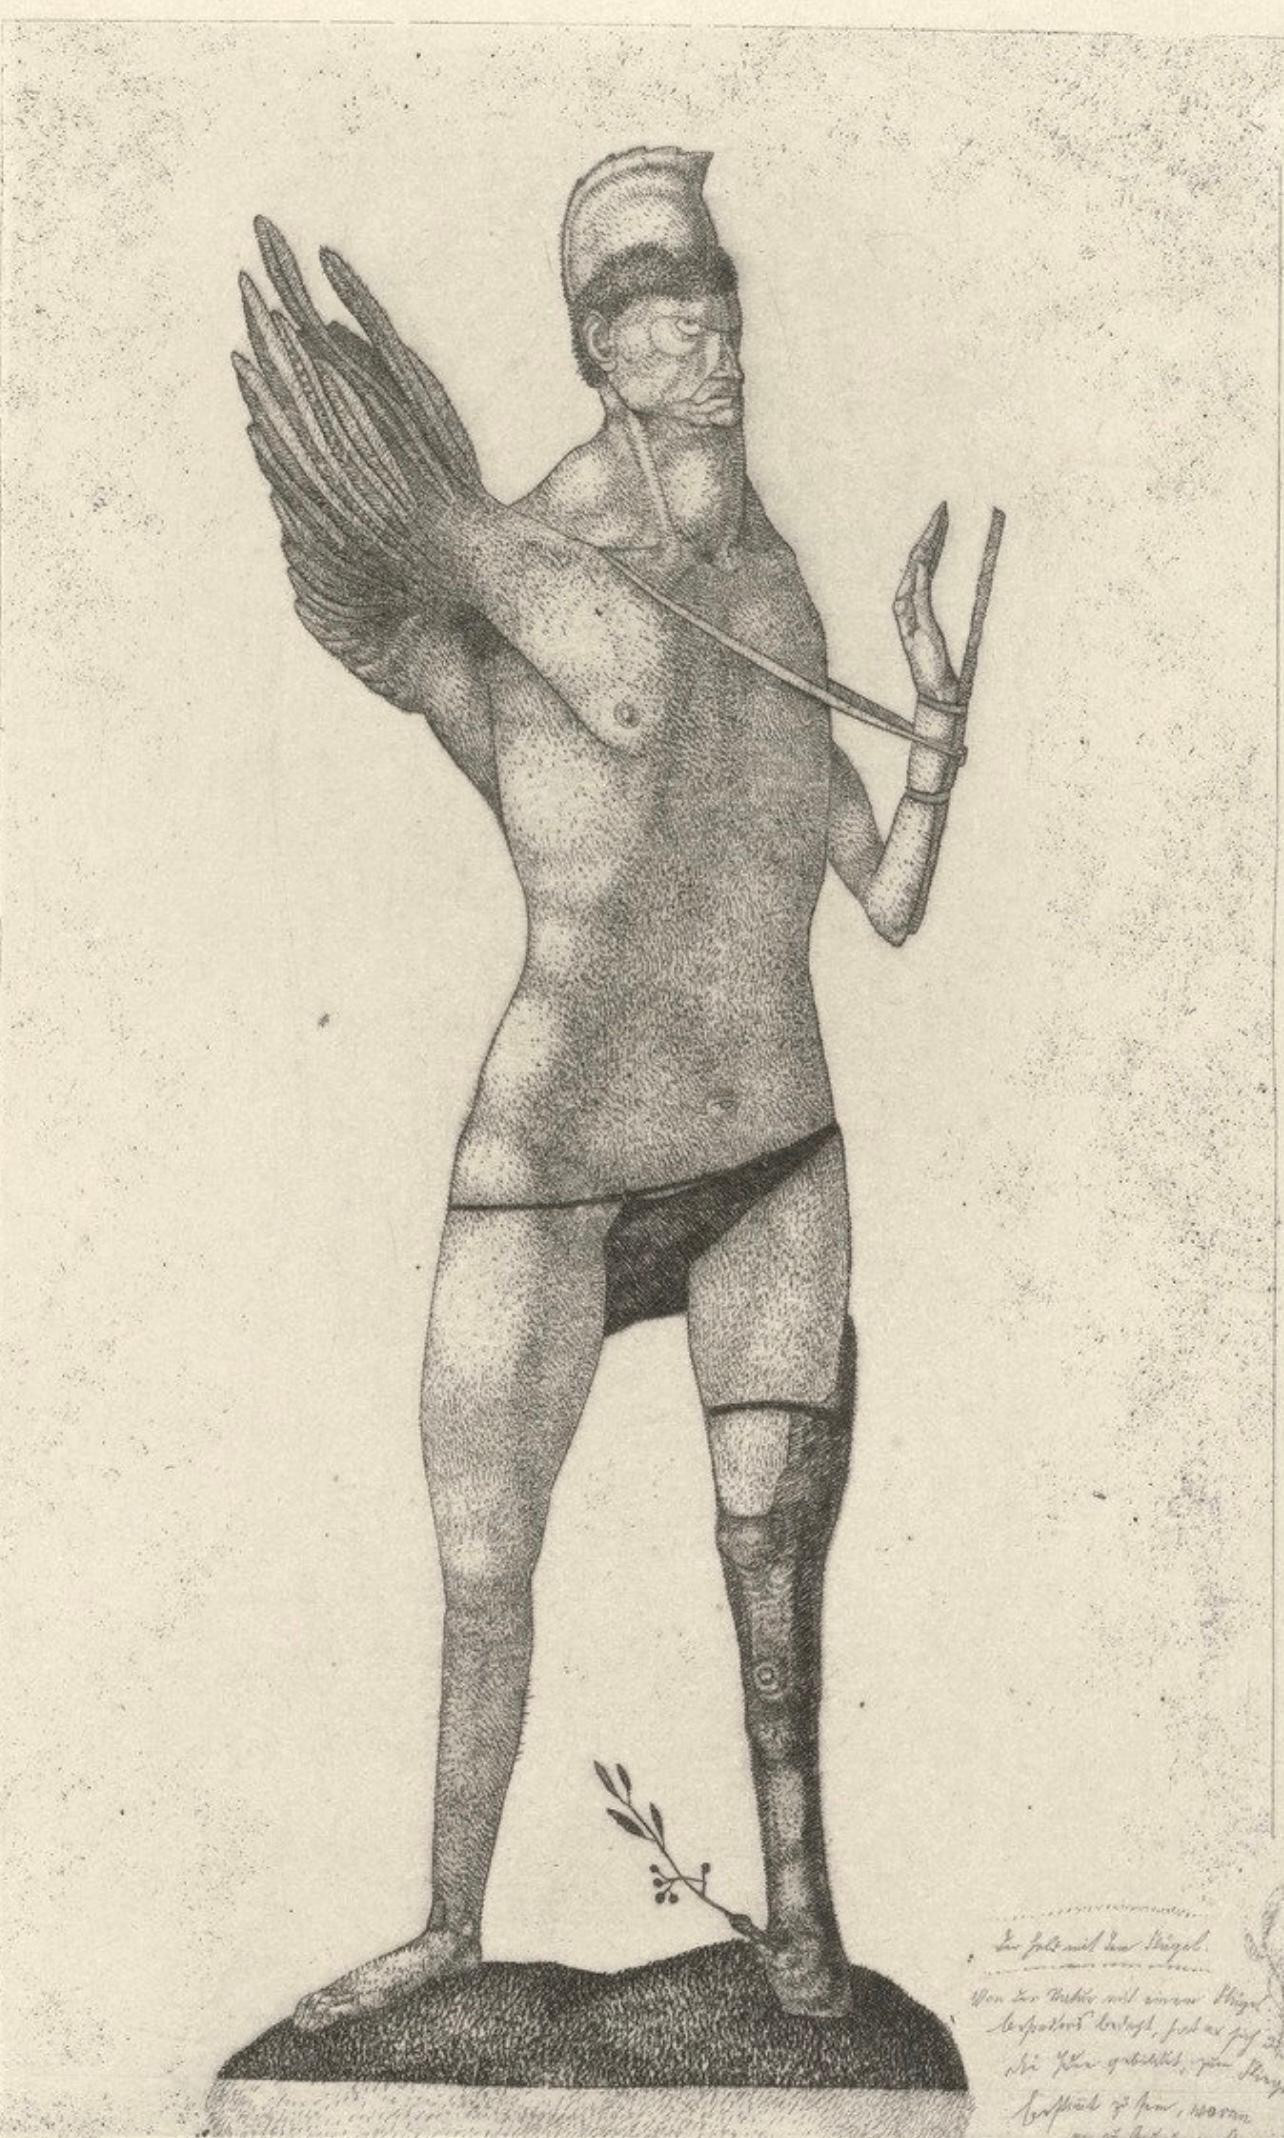 Klee, The Hero with the Wing, Prints of Paul Klee (after)